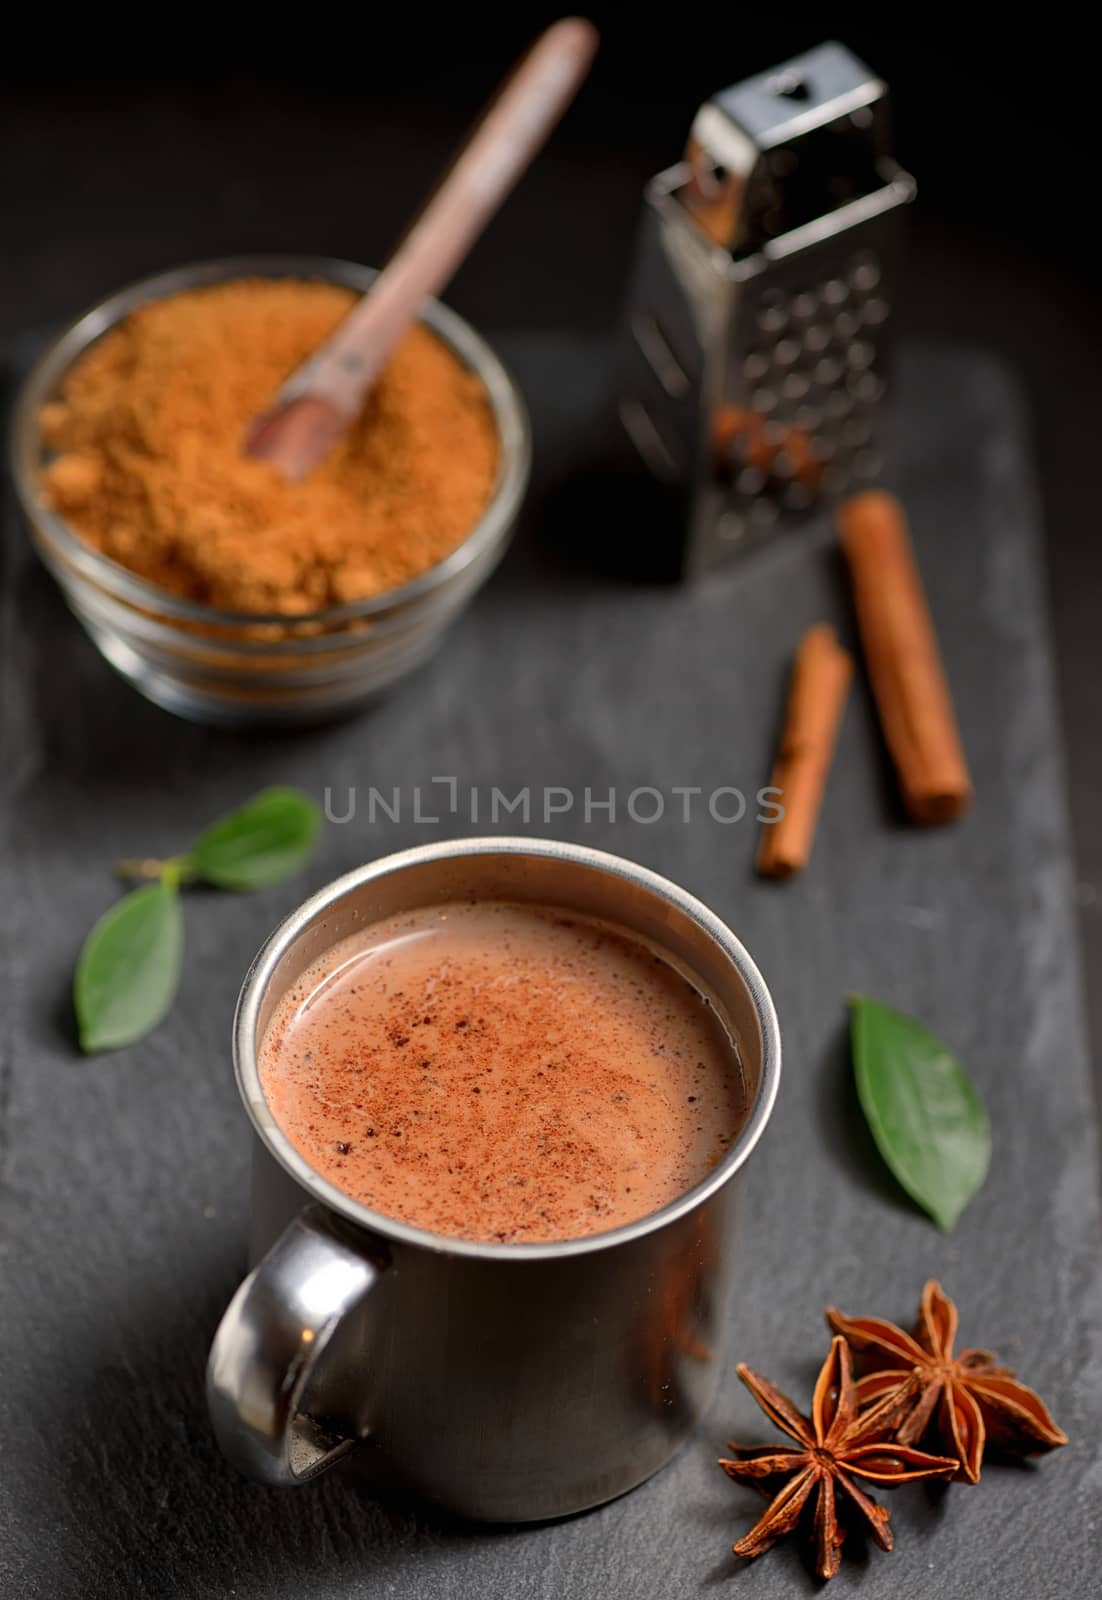 Cup of hot chocolate, cinnamon sticks by mady70